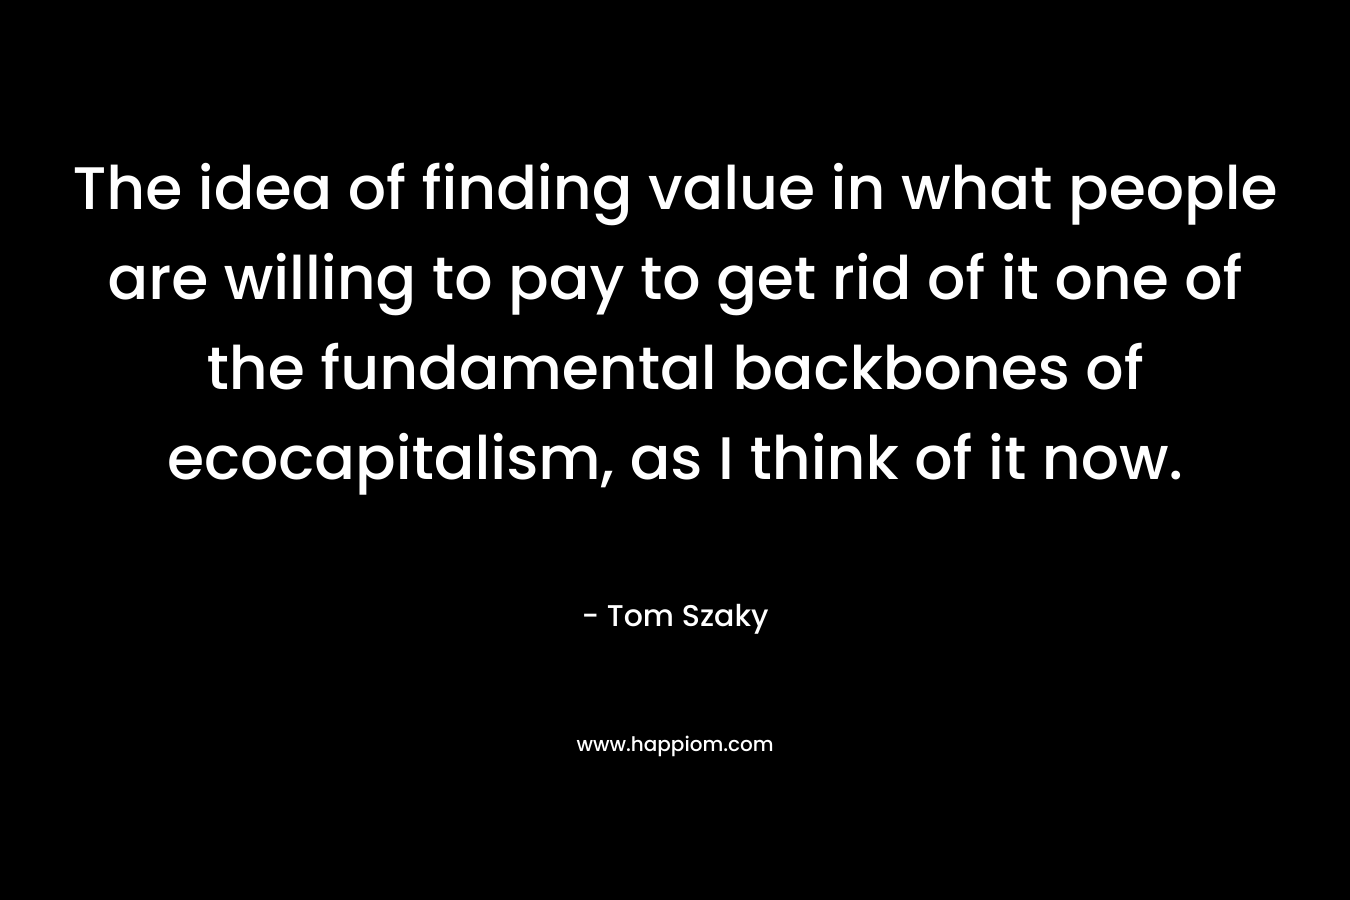 The idea of finding value in what people are willing to pay to get rid of it one of the fundamental backbones of ecocapitalism, as I think of it now.